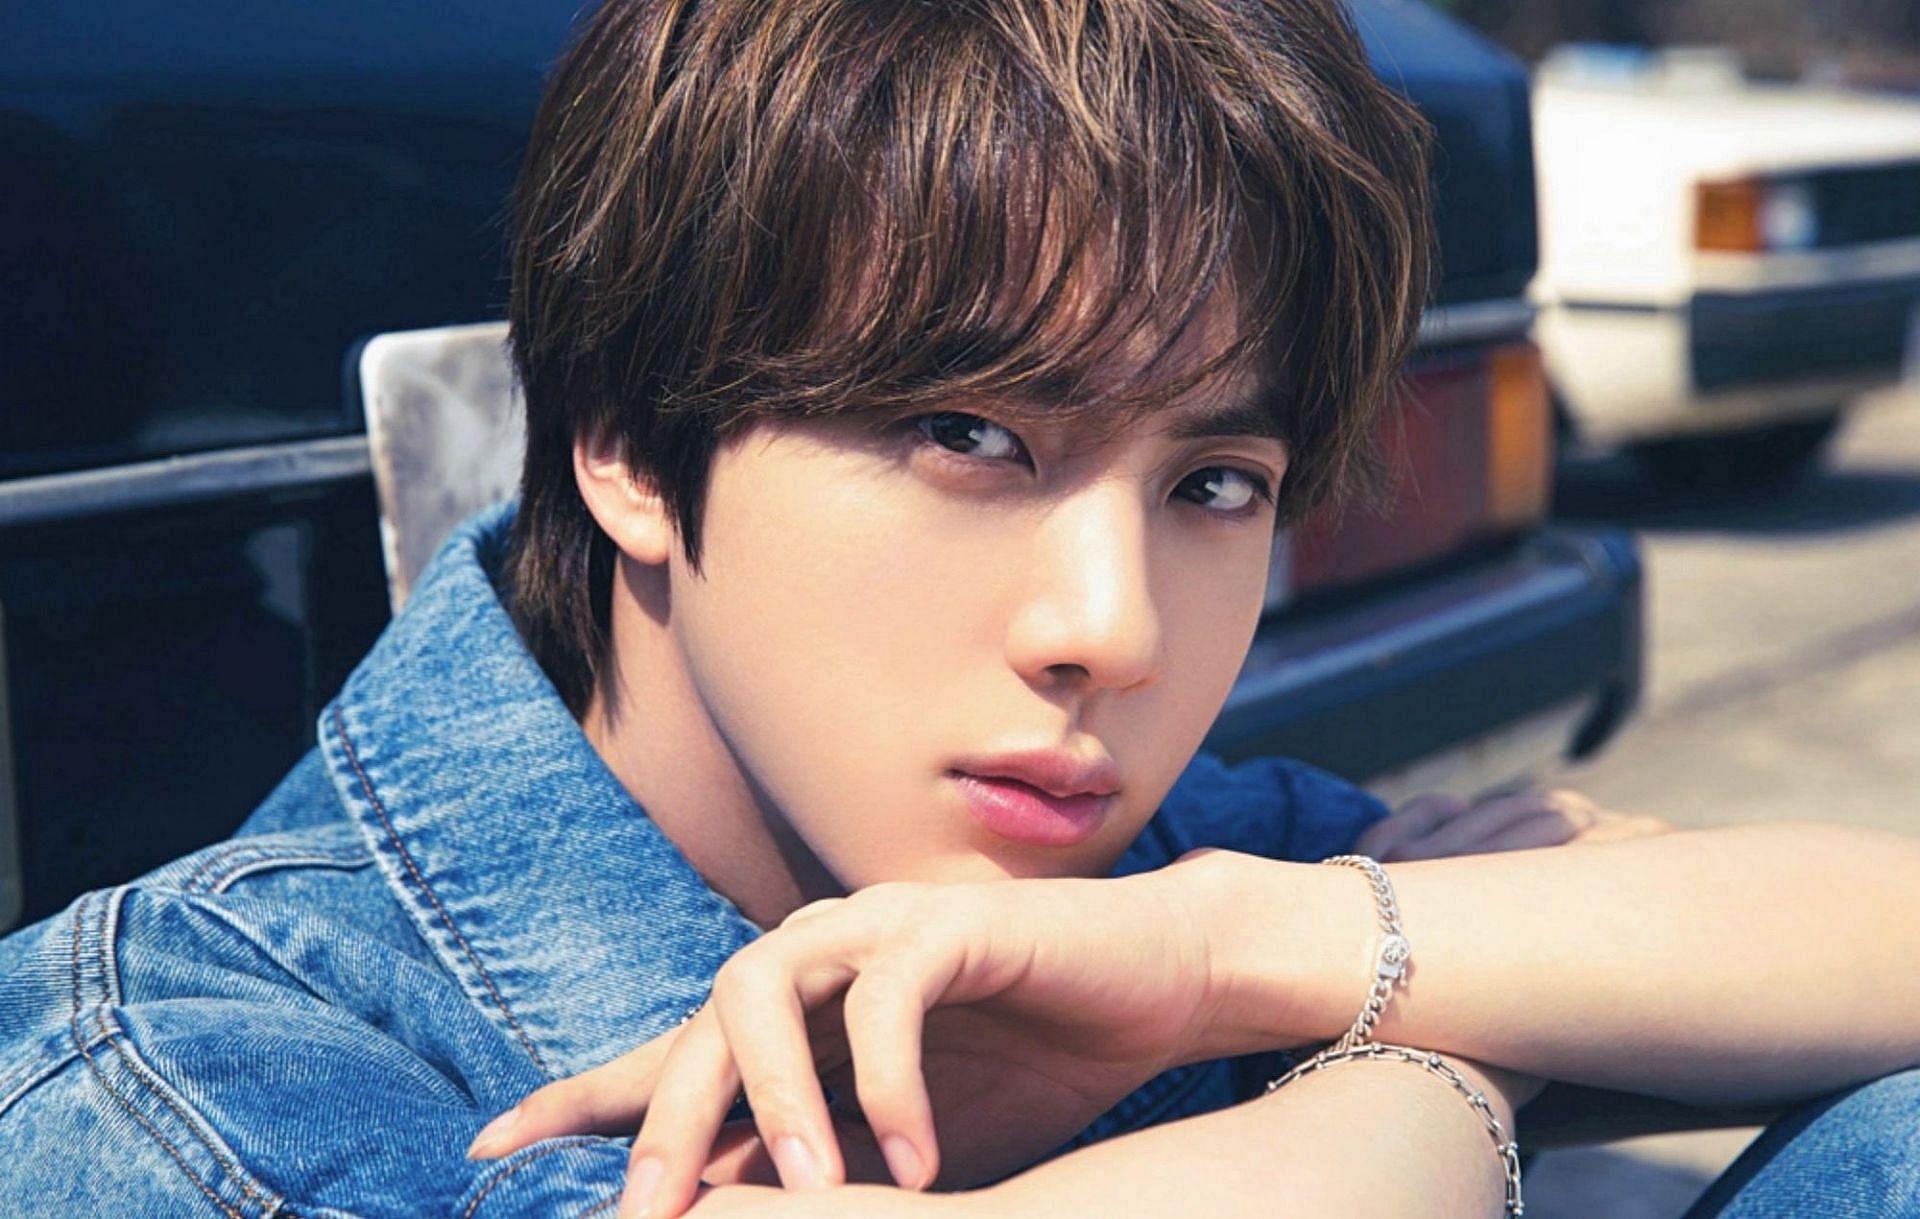 BTS member Jin is still learning how to use Instagram (Image via IMDB/Big Hit Entertainment)